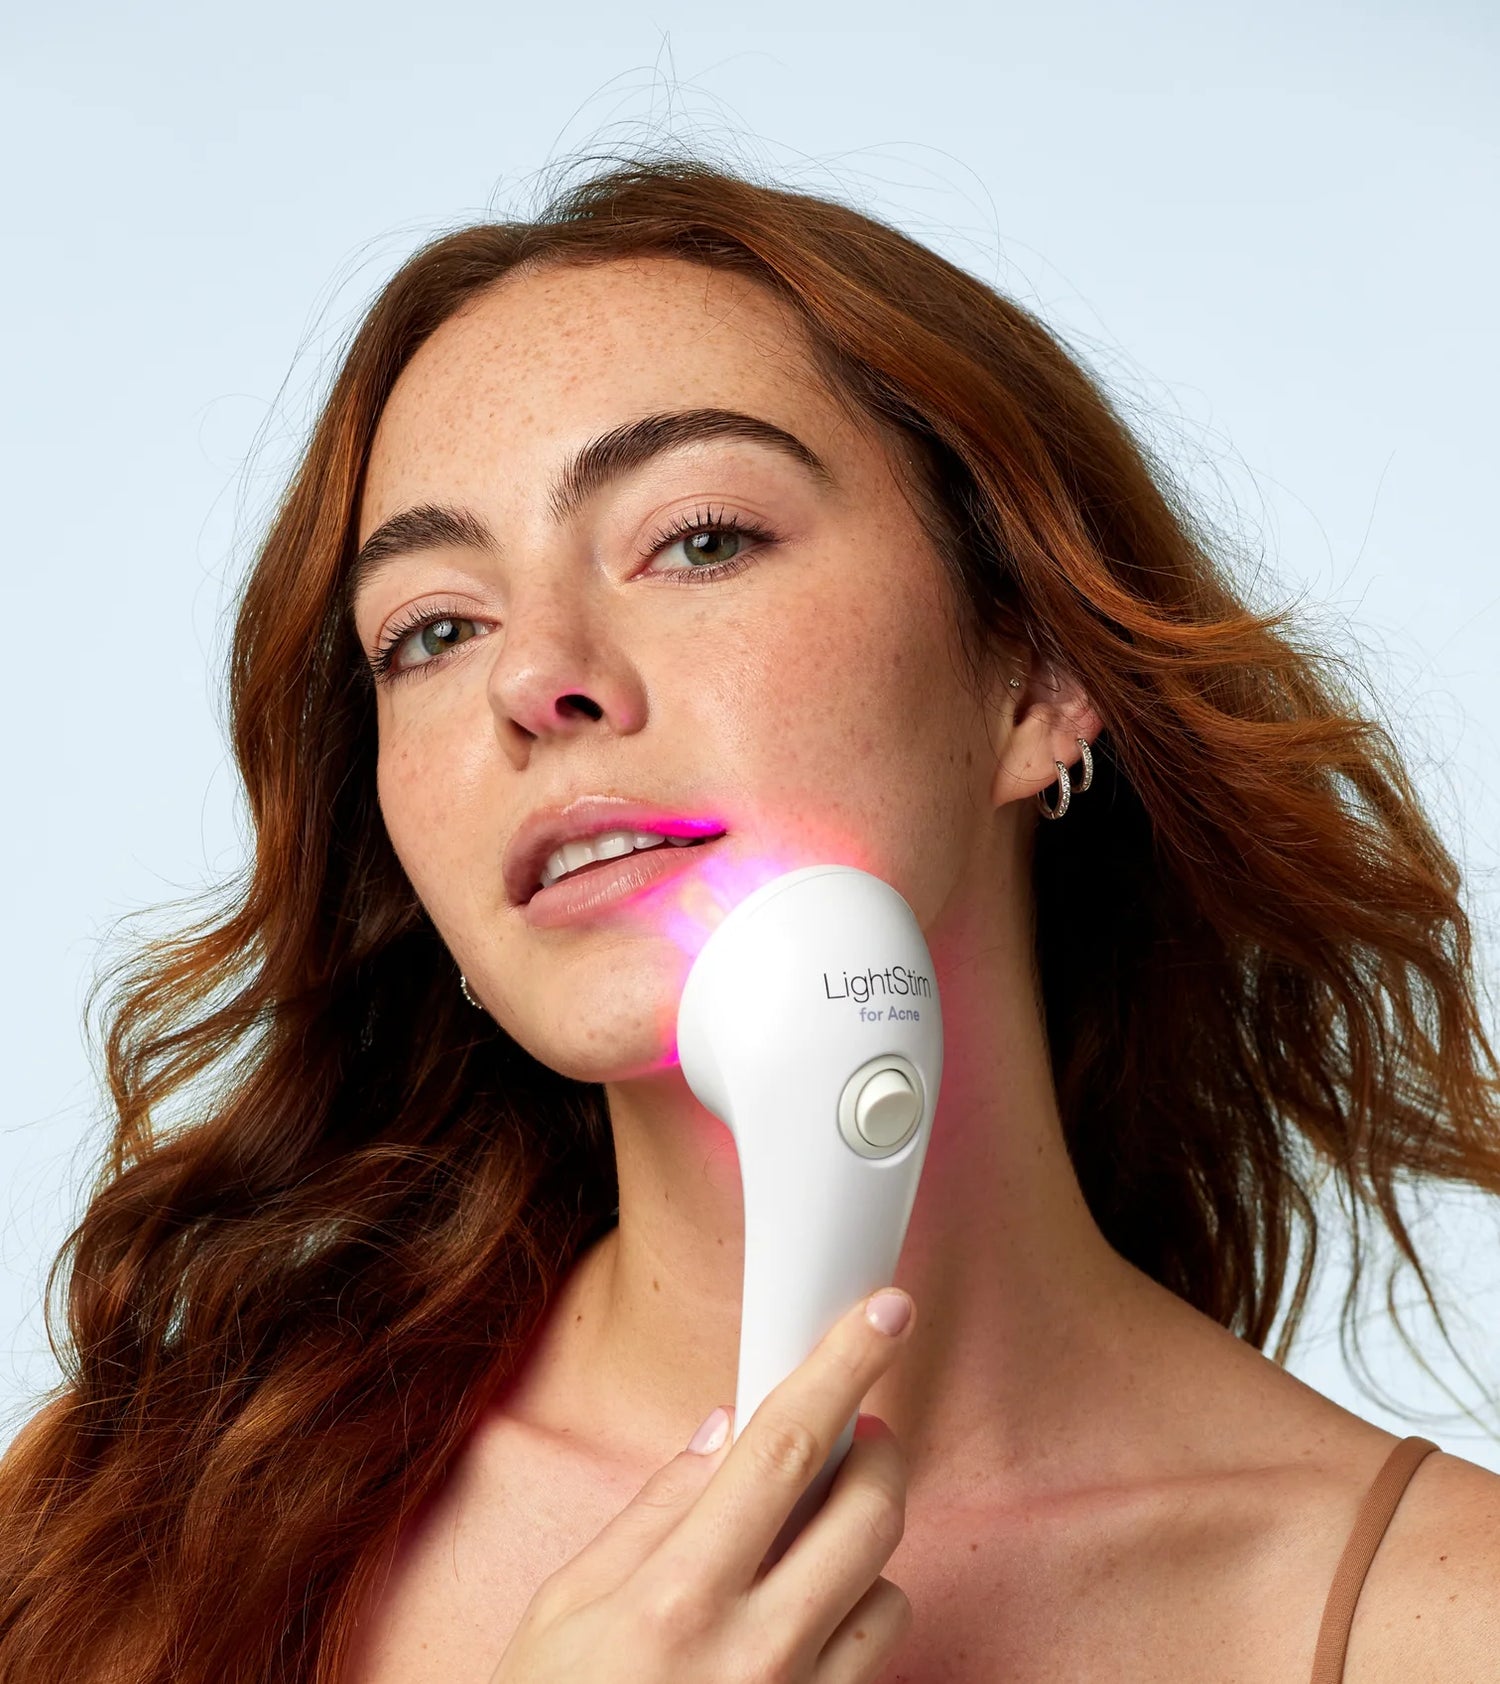 LightStim for Acne Product Photo with the model